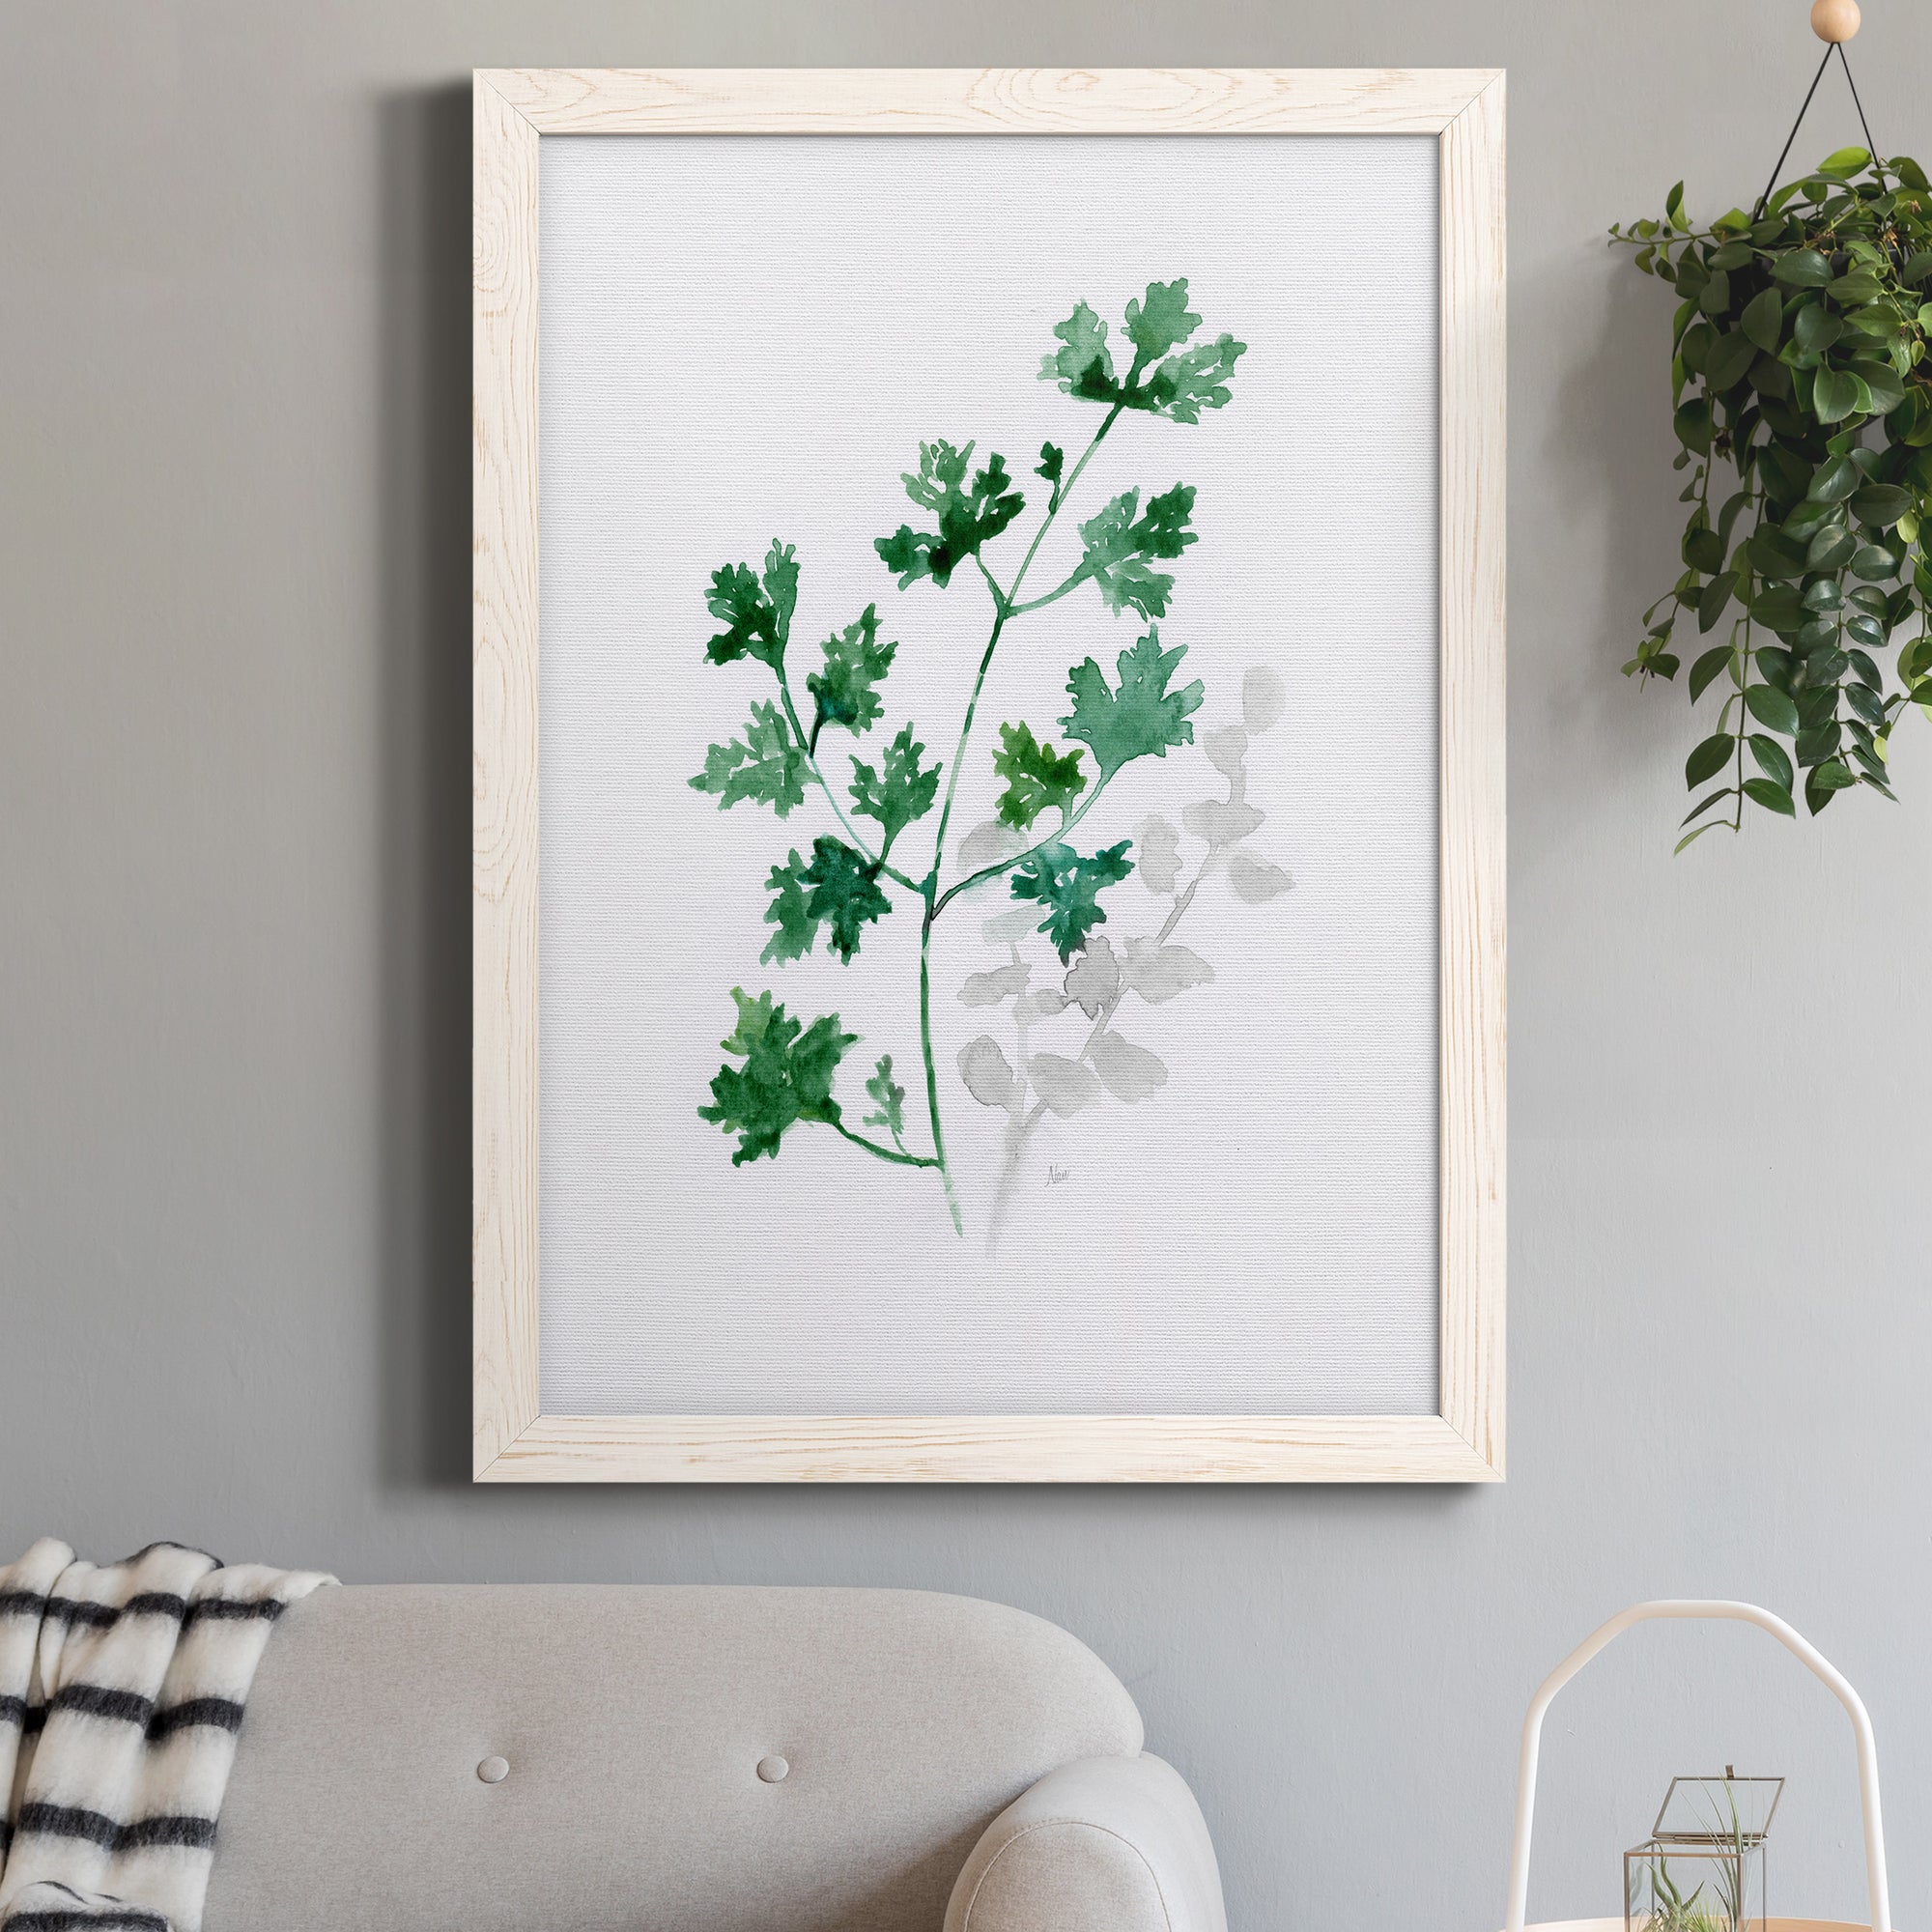 Freshly Picked I - Premium Canvas Framed in Barnwood - Ready to Hang